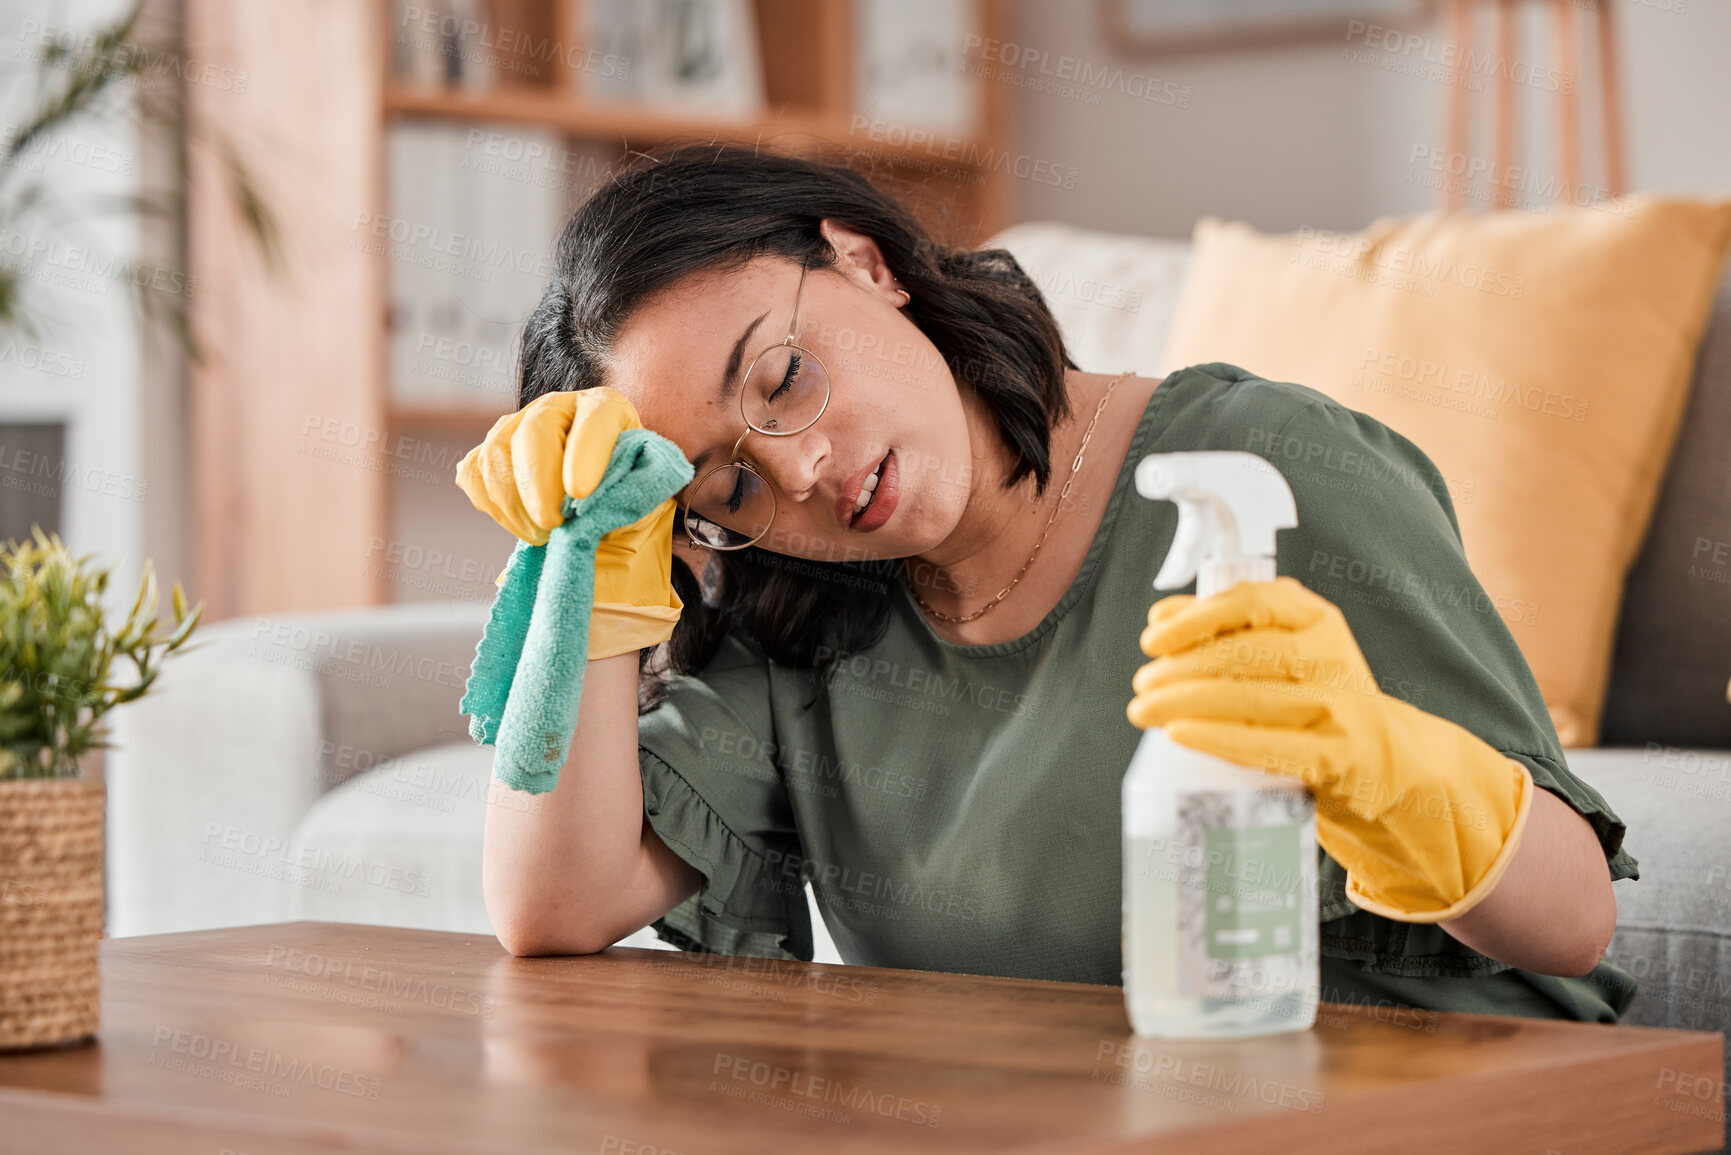 Buy stock photo Tired woman, housekeeper and headache with detergent for cleaning furniture, hygiene or bacterial removal at home. Exhausted female person, cleaner or maid in burnout or overworked from housework